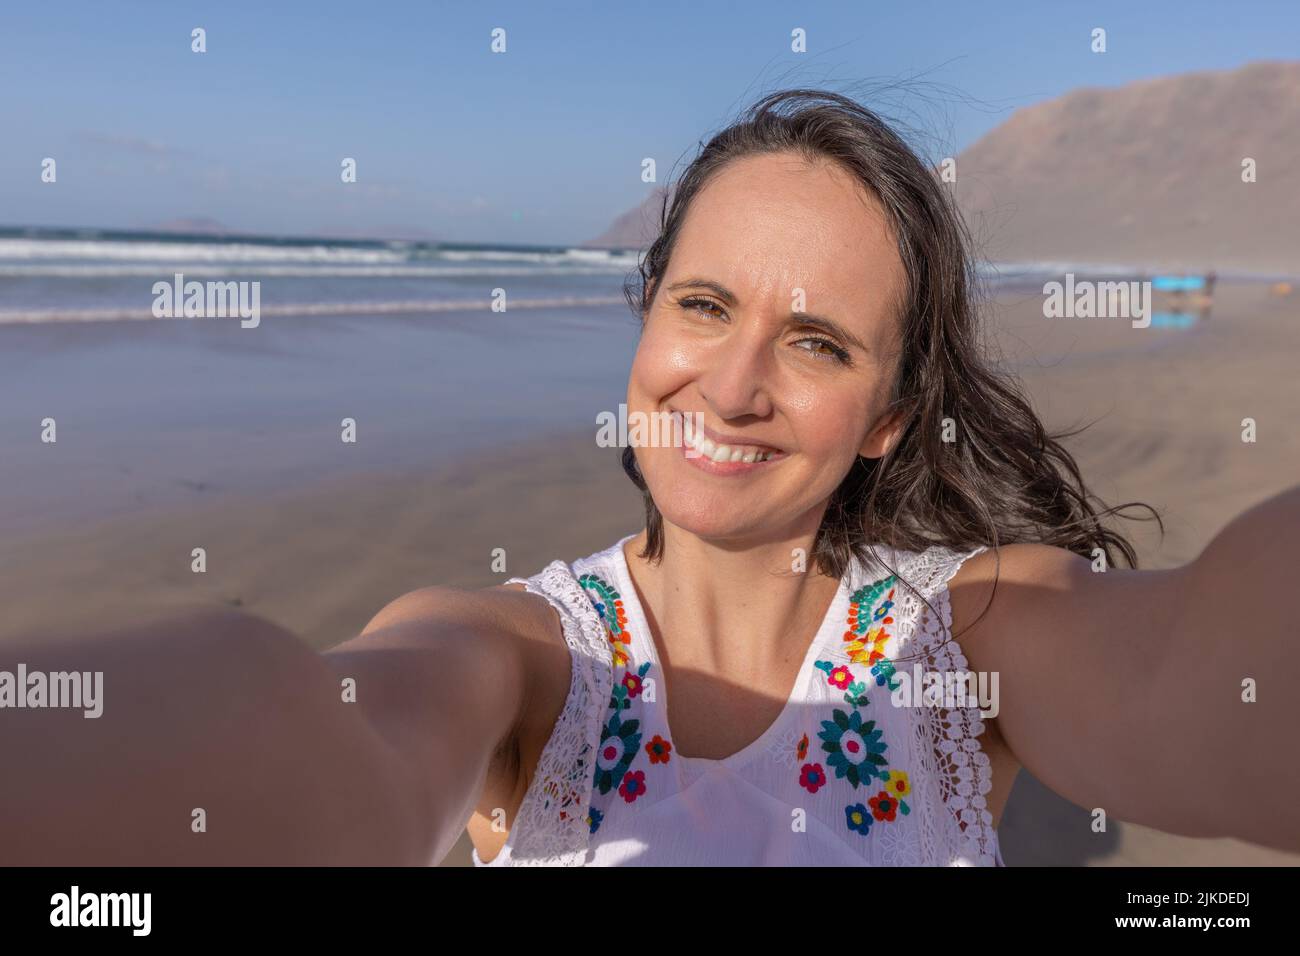 Cheerful middle aged woman with dark hair smiling and looking at camera while taking selfie on sandy beach near waving sea on summer weekend day. Stock Photo